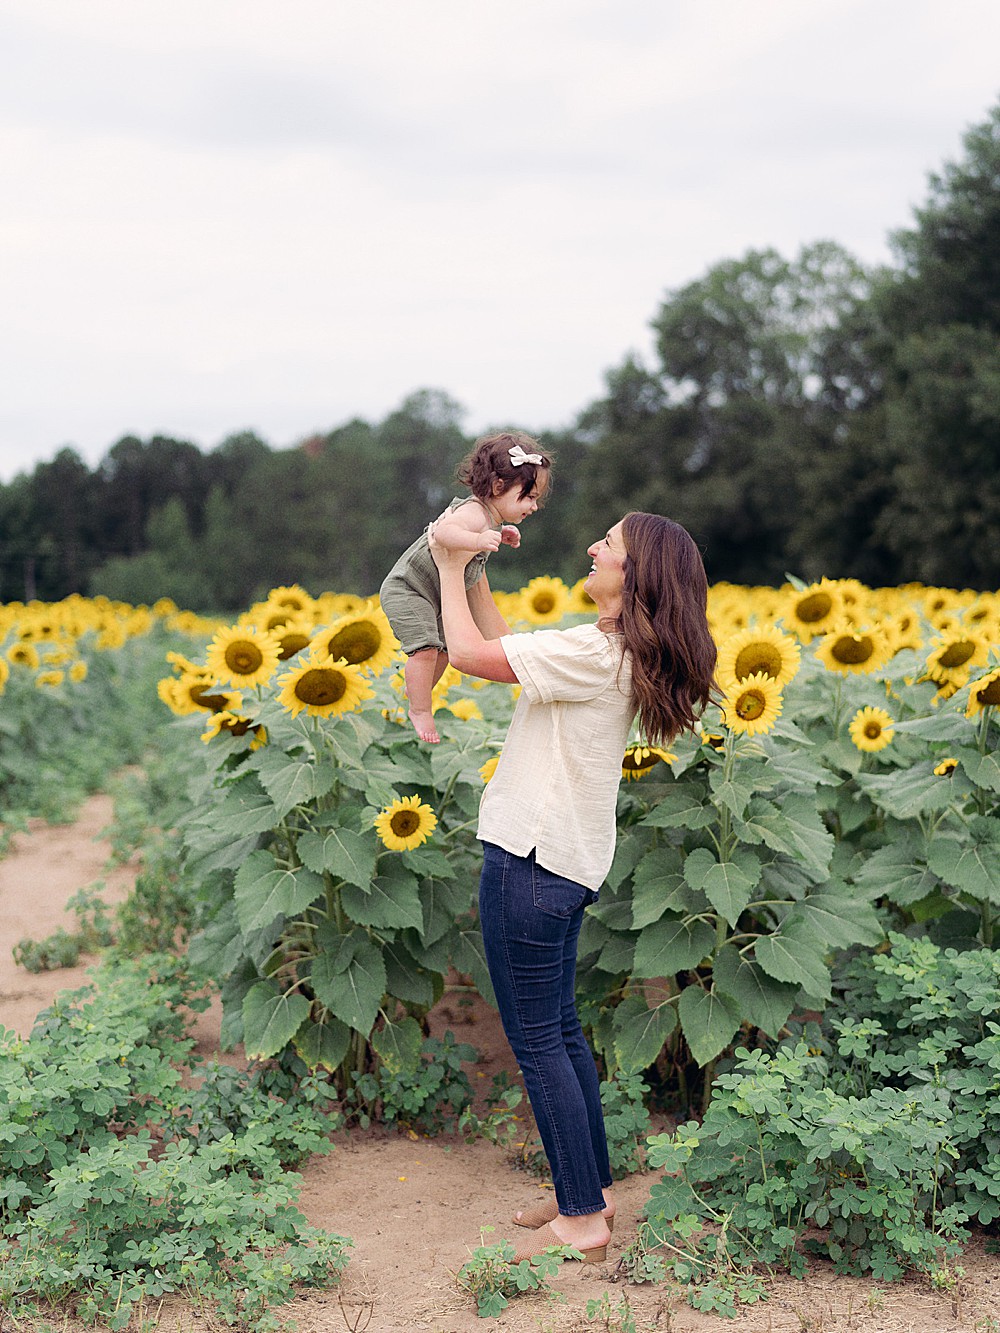 Family photos at Gregg Farms' sunflower field in Concord, Georgia